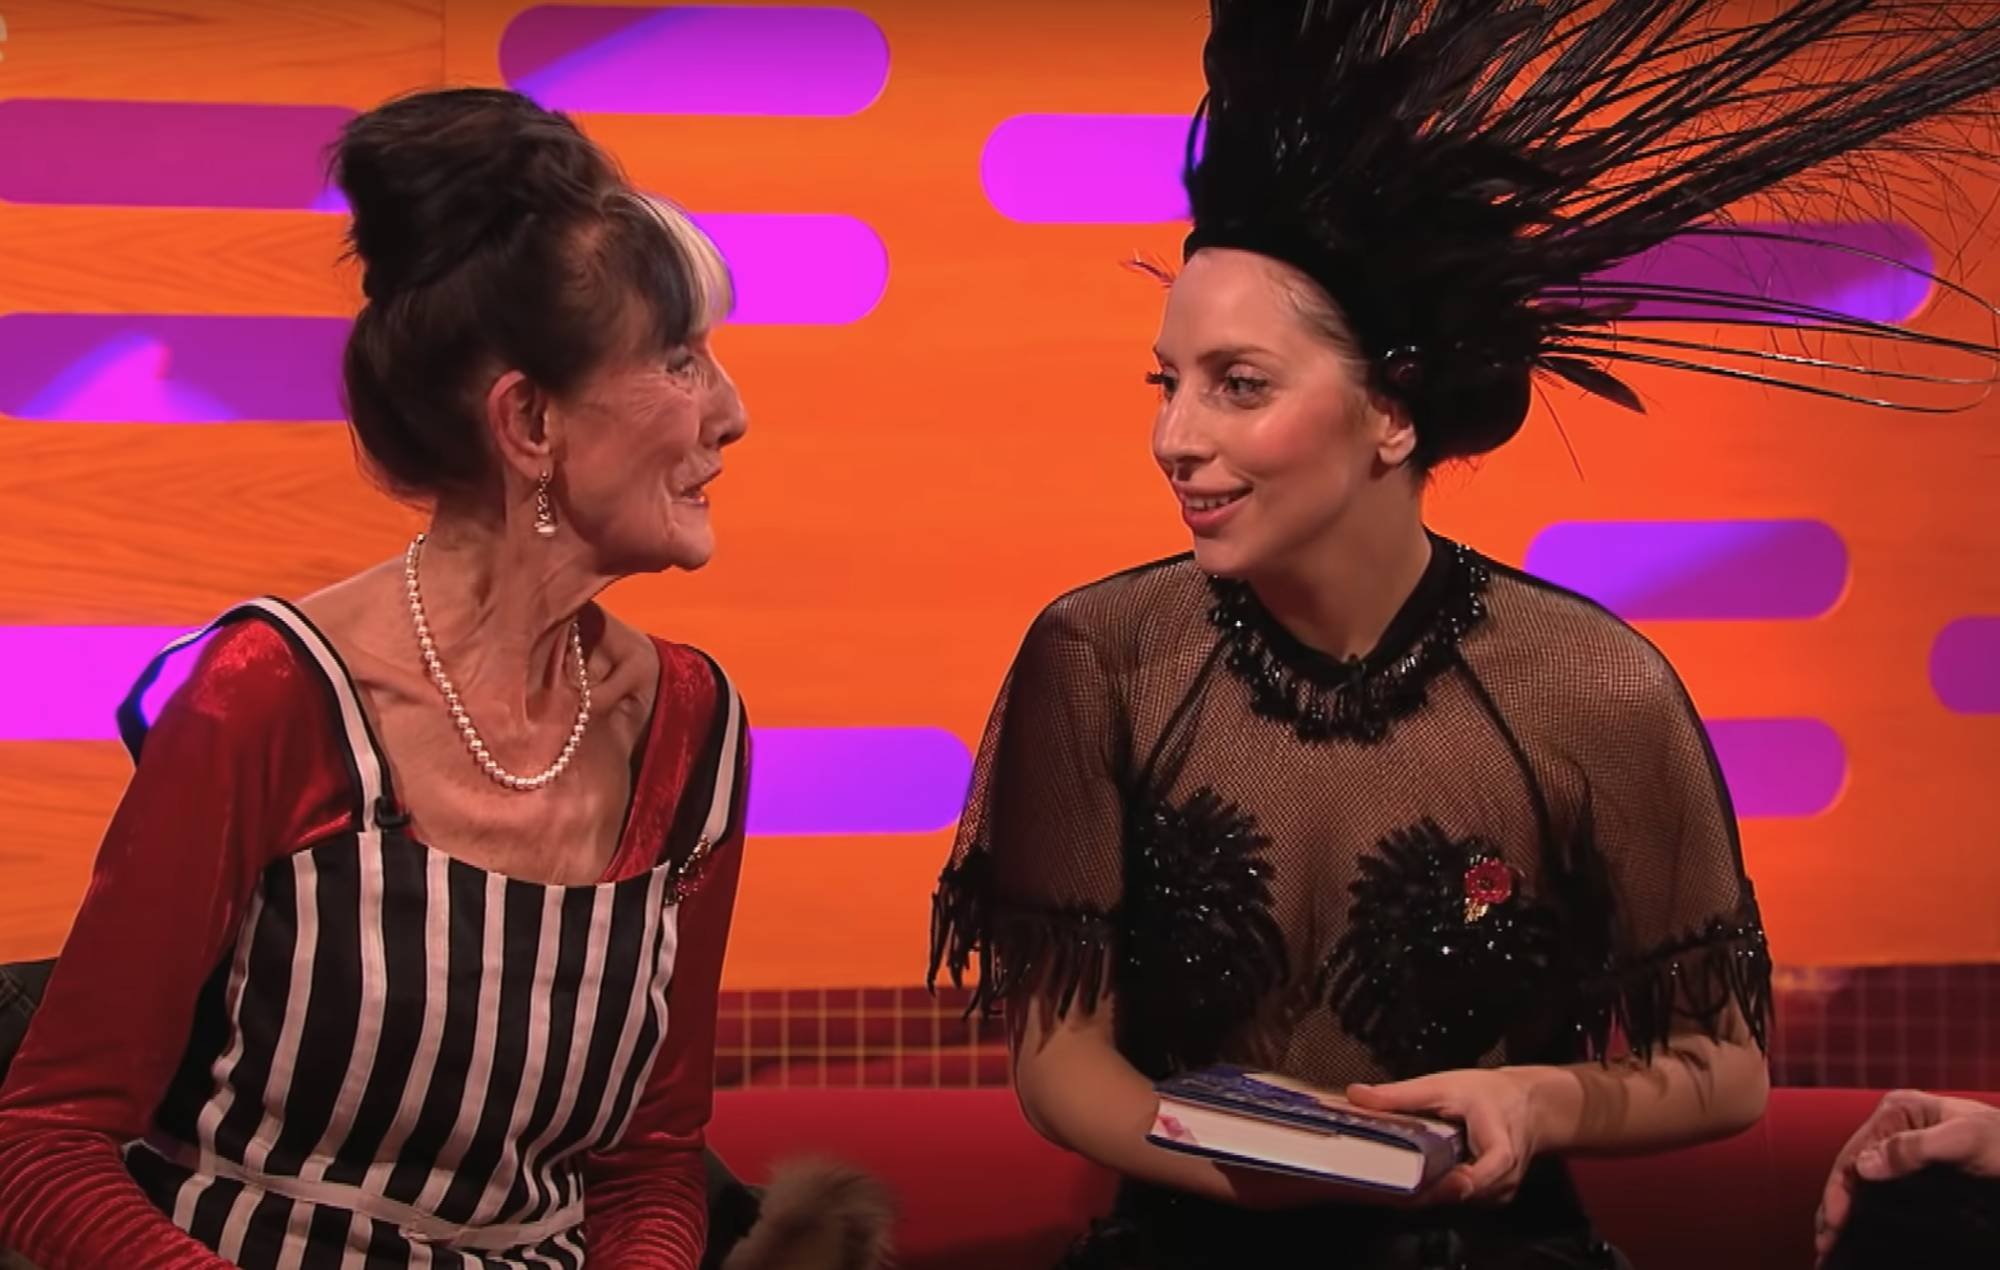 Fans are reminiscing over when June Brown met Lady Gaga